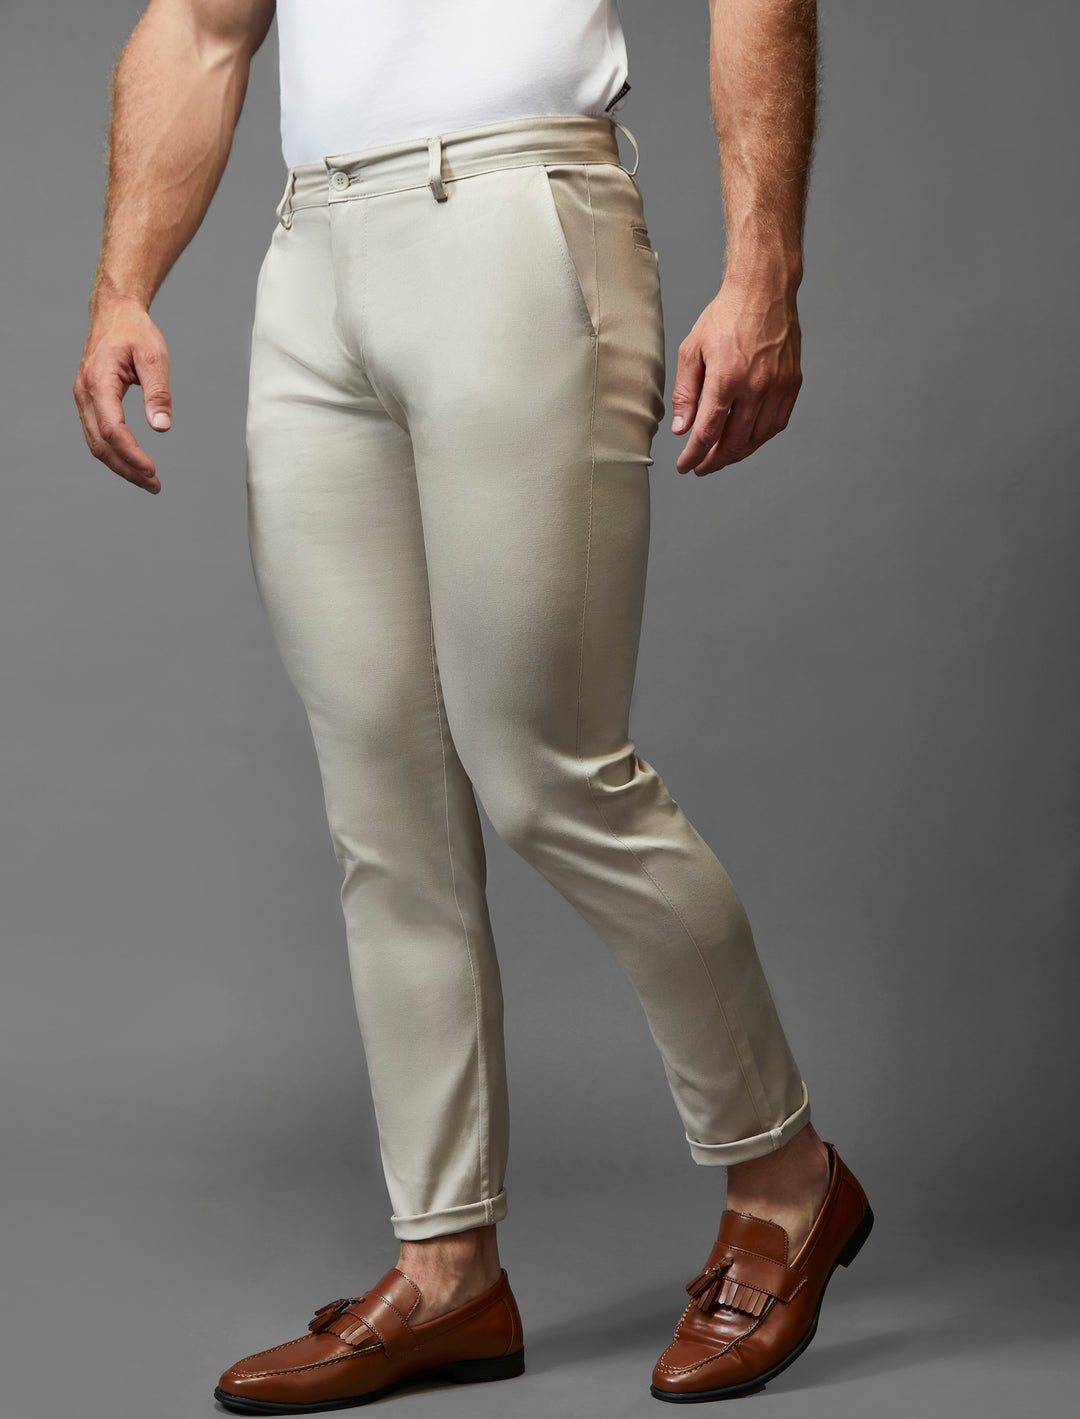 Muscle Fit Trousers & Chino Pants For Men with Muscular Legs